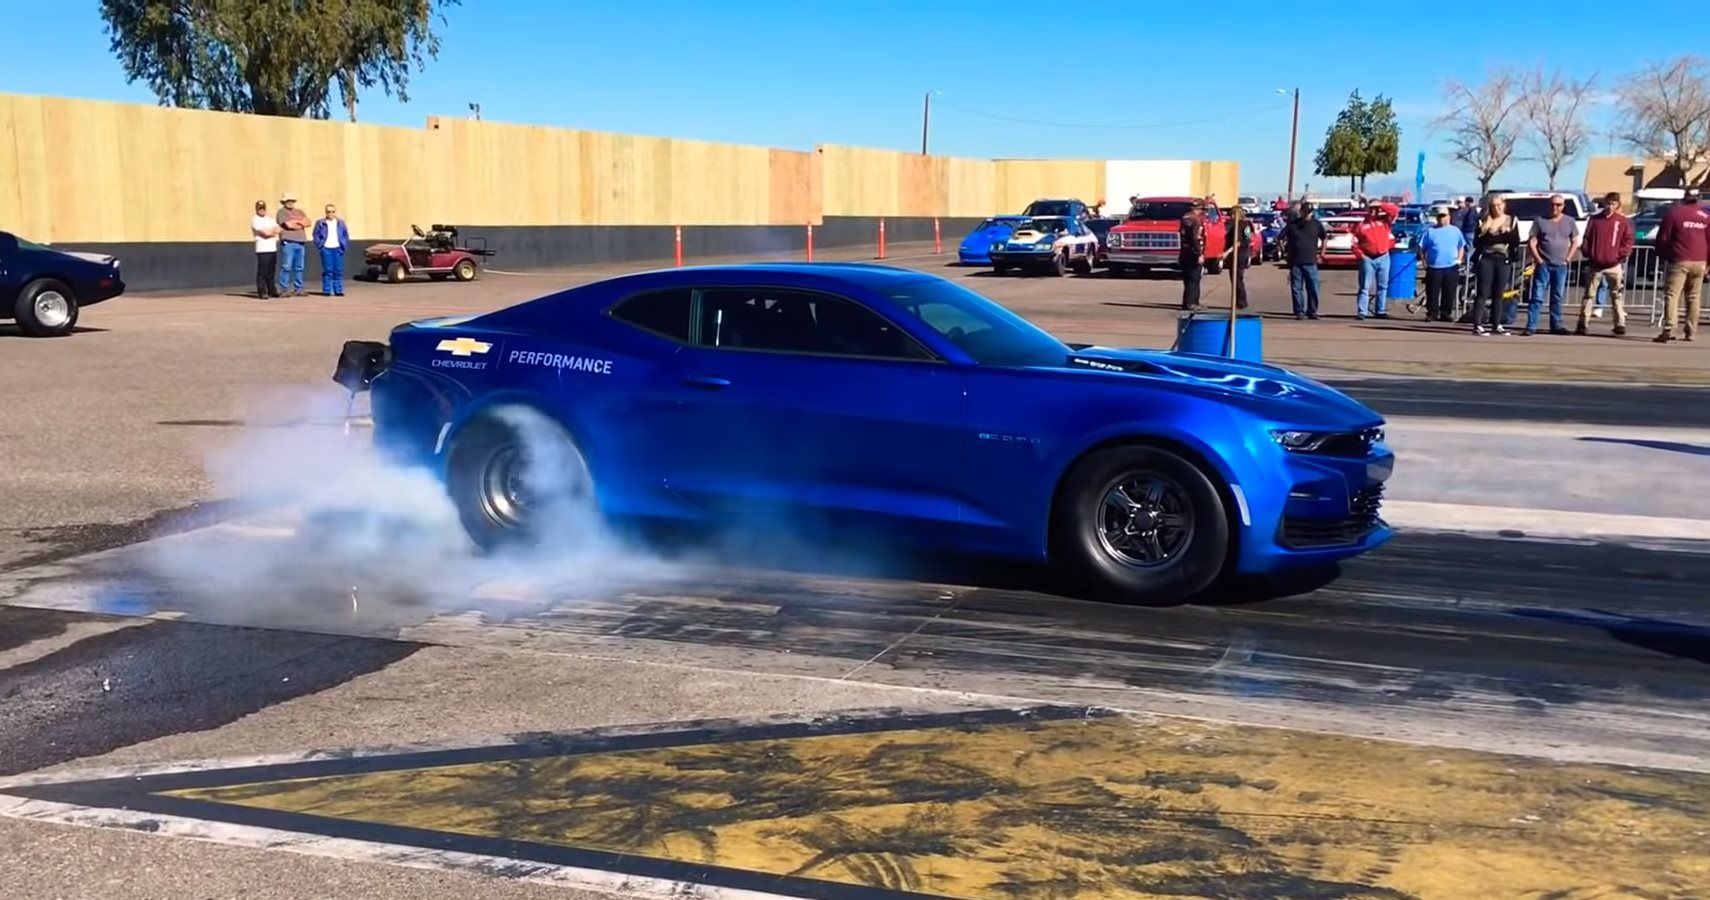 Check Out Chevy's New Electric eCOPO Camaro In Drag Race Action